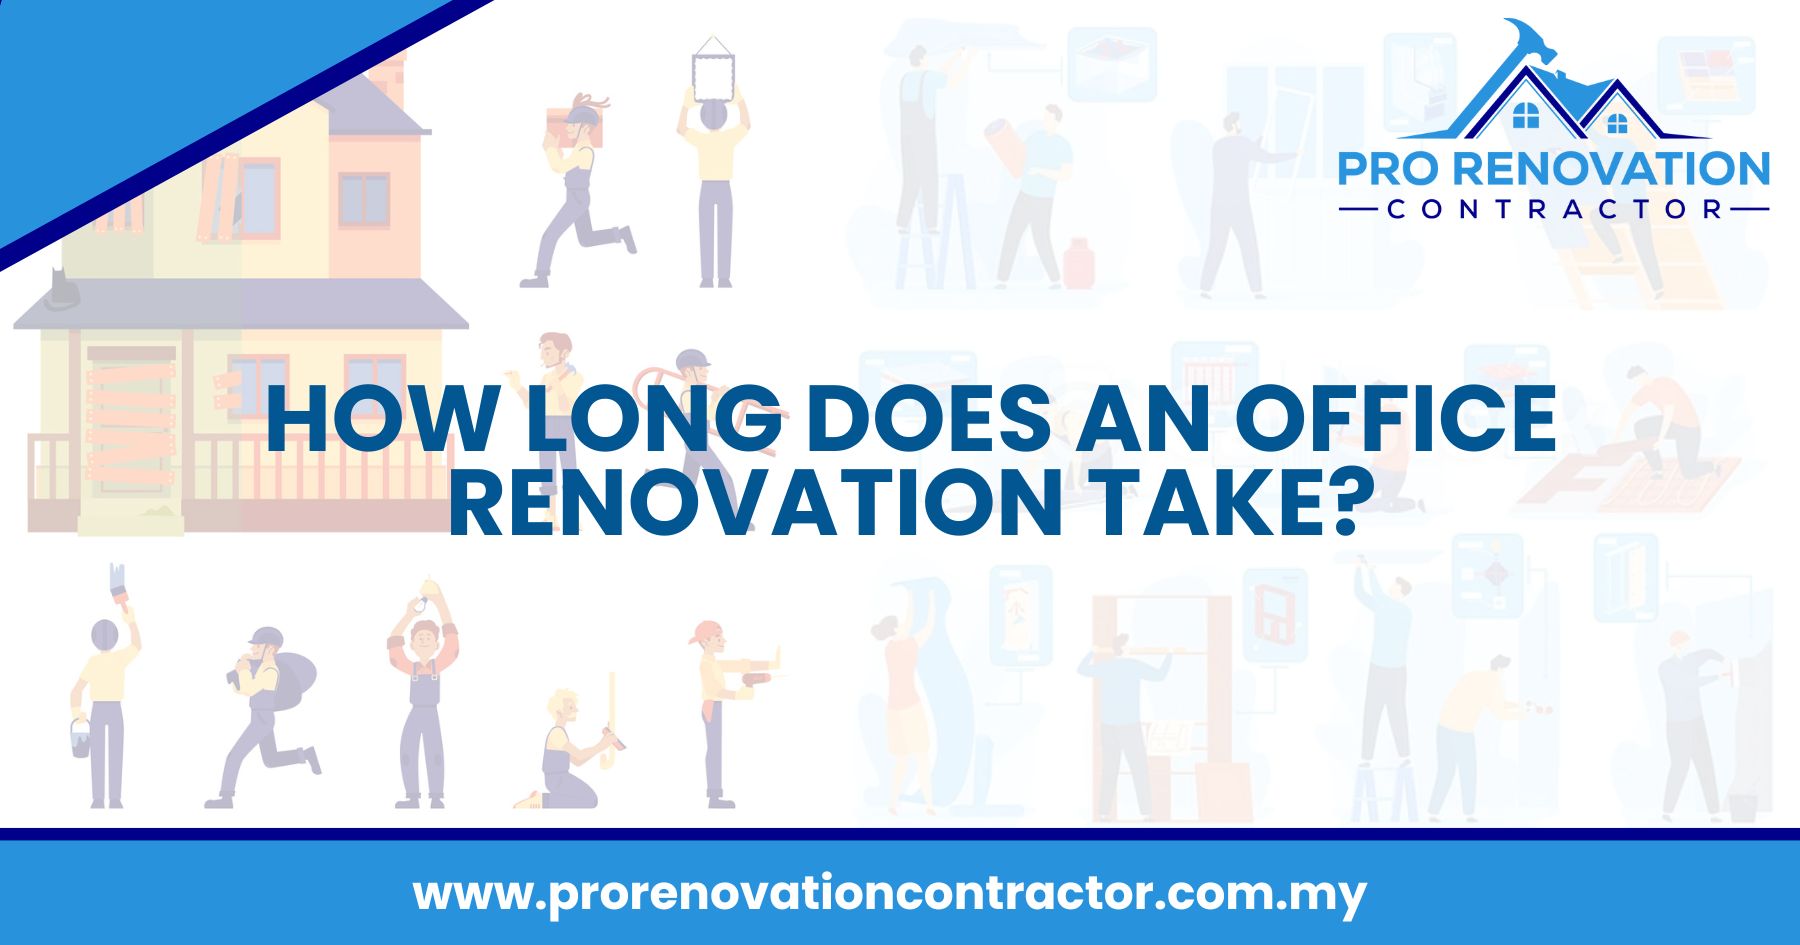 How Long Does An Office Renovation Take?